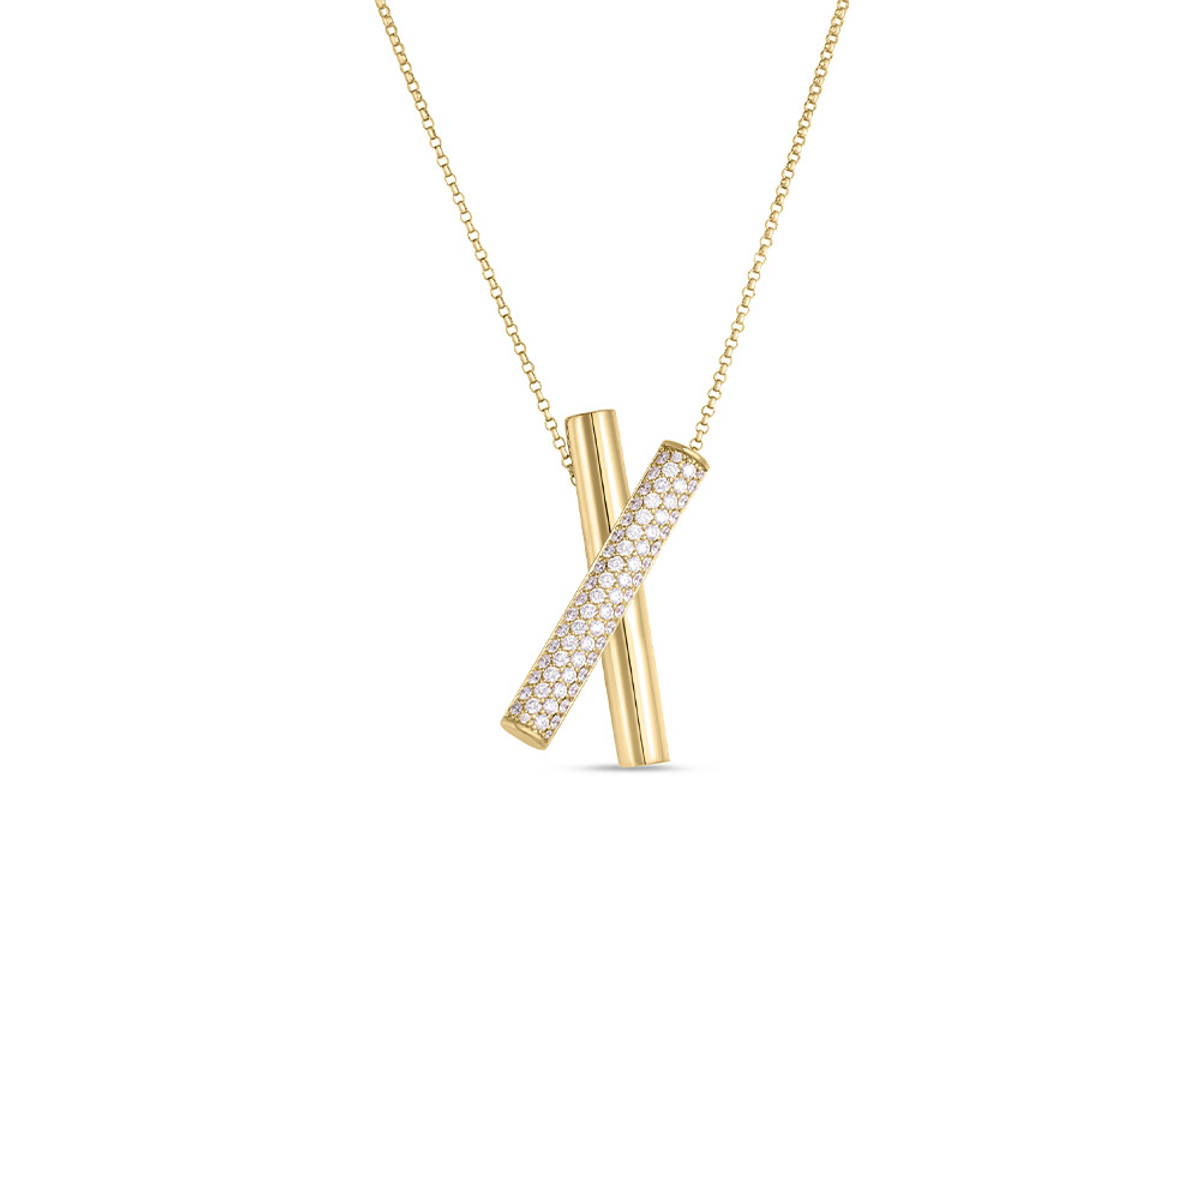 Roberto Coin 18K Yellow Gold Domino Diamond Necklace-57405 Product Image